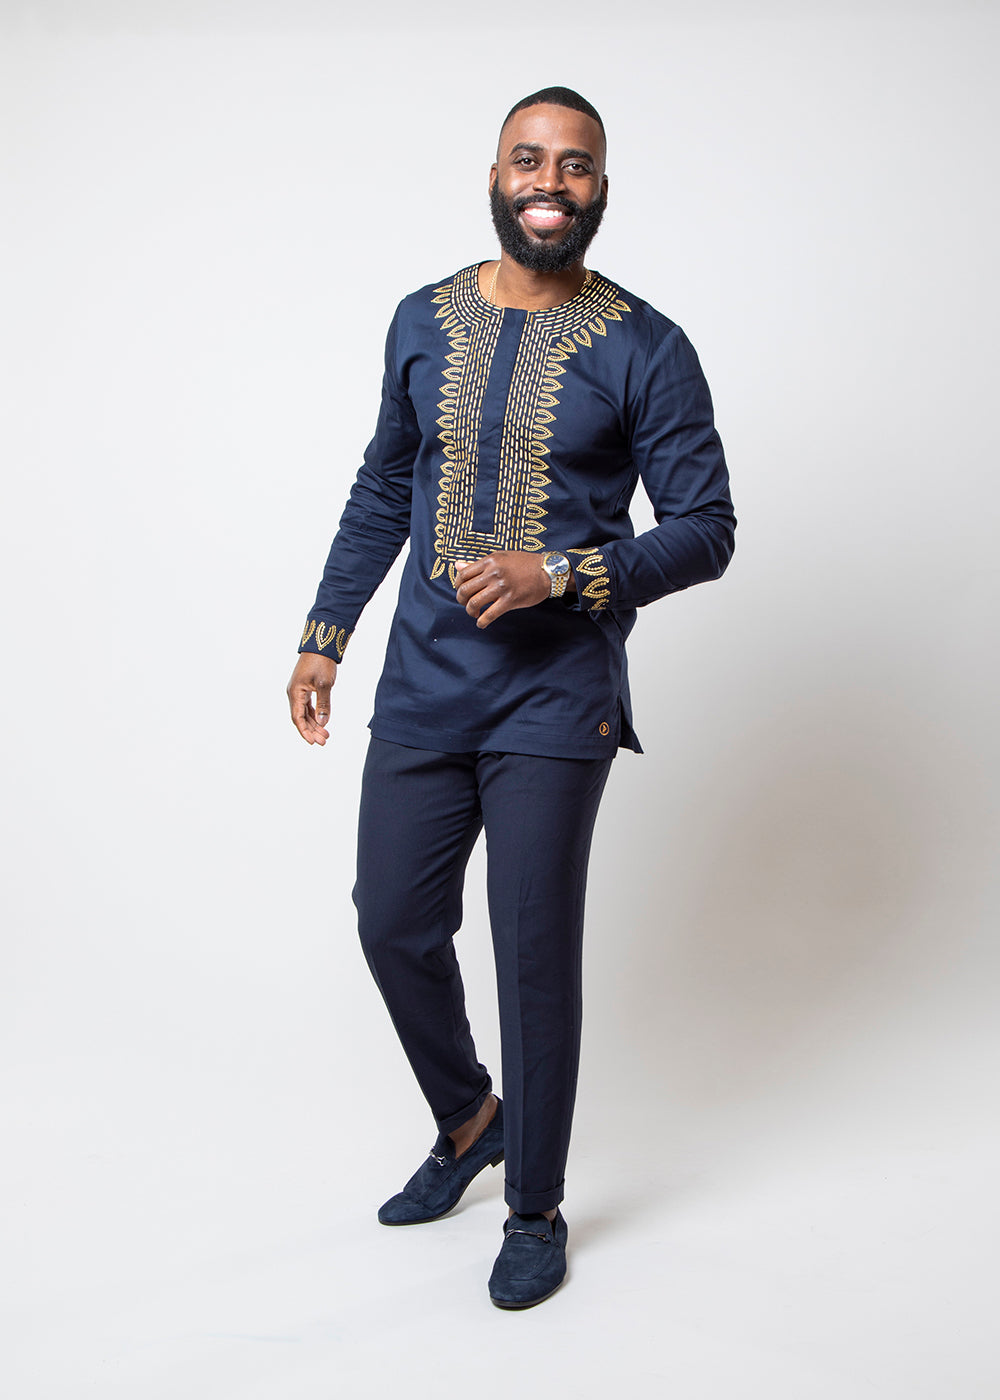 Karim Men's Embroidered Traditional Top Navy with Gold Embroidery – D'IYANU